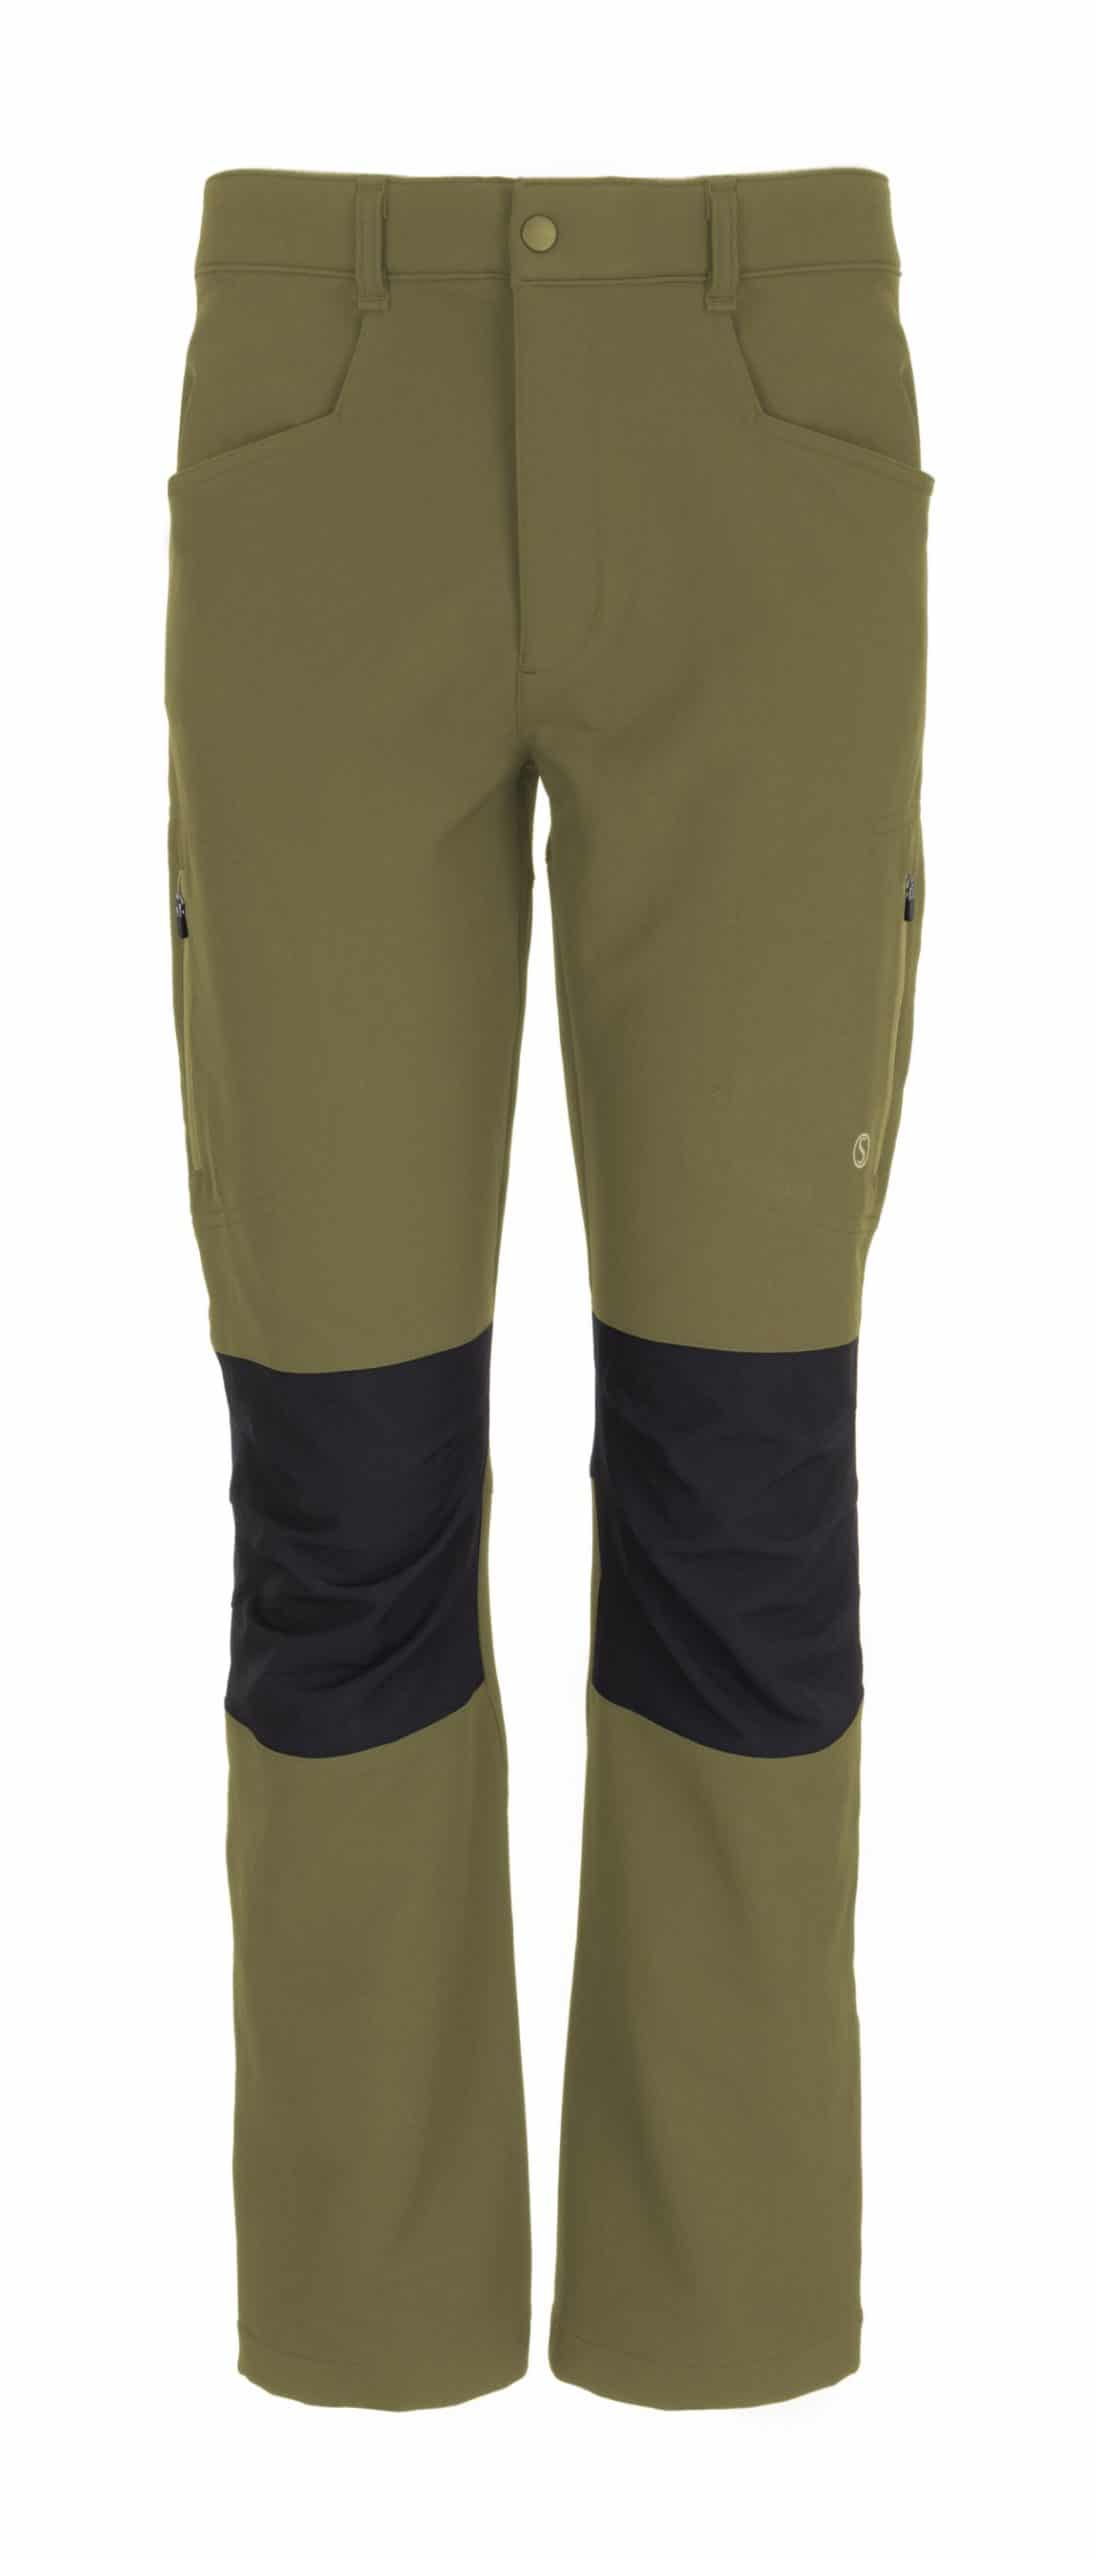 Silverpoint Glenmore trousers Olive black